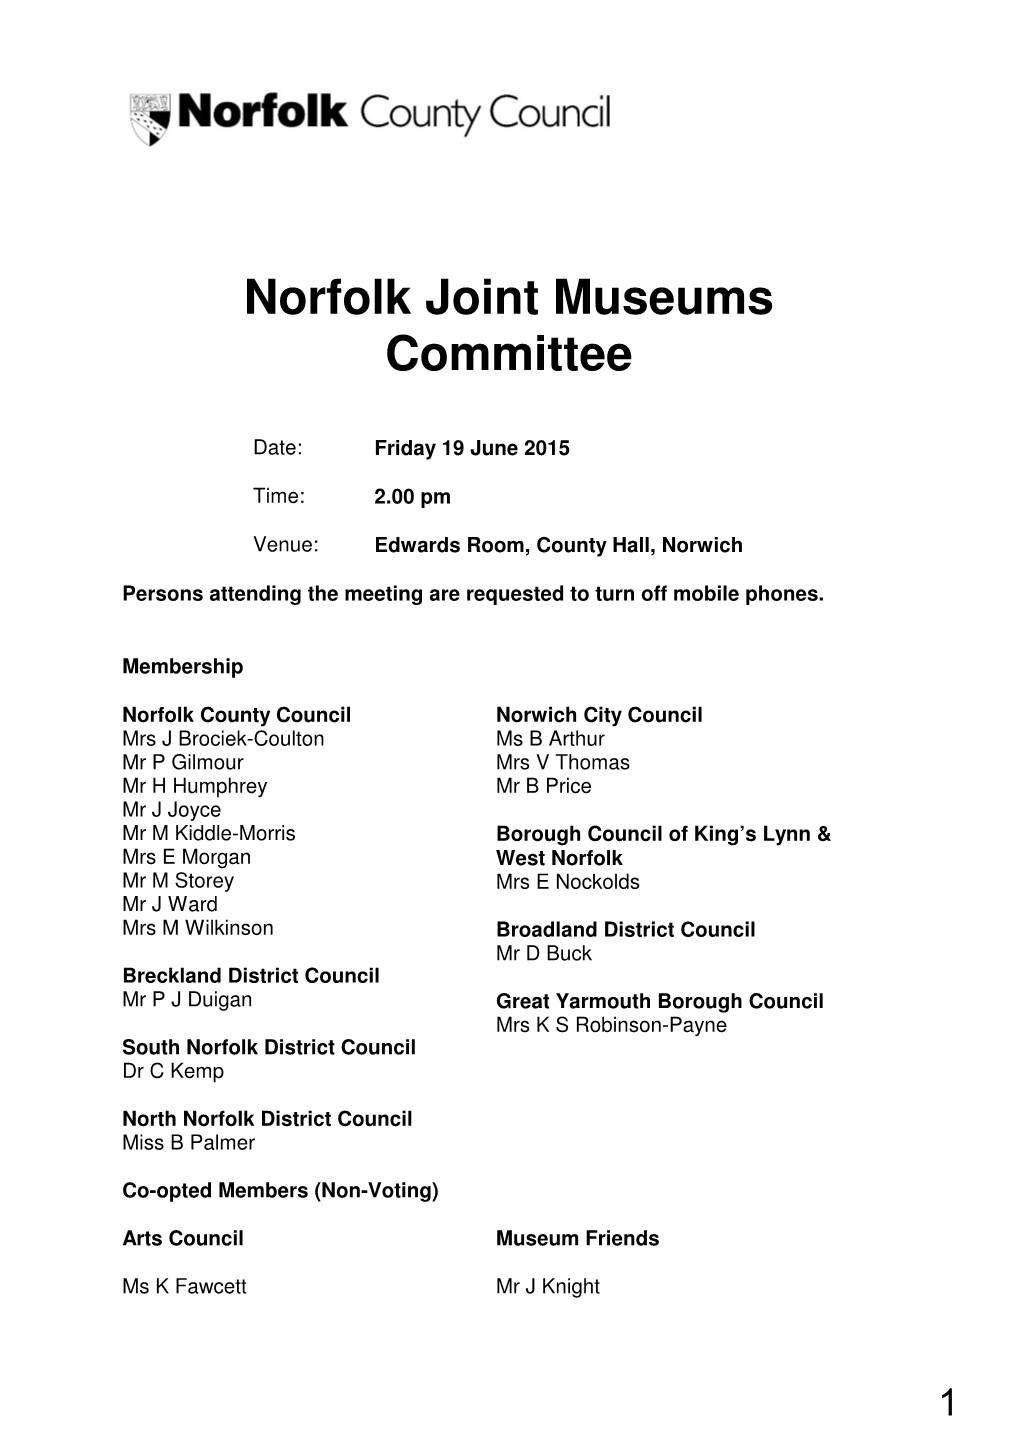 Norfolk Joint Museums Committee